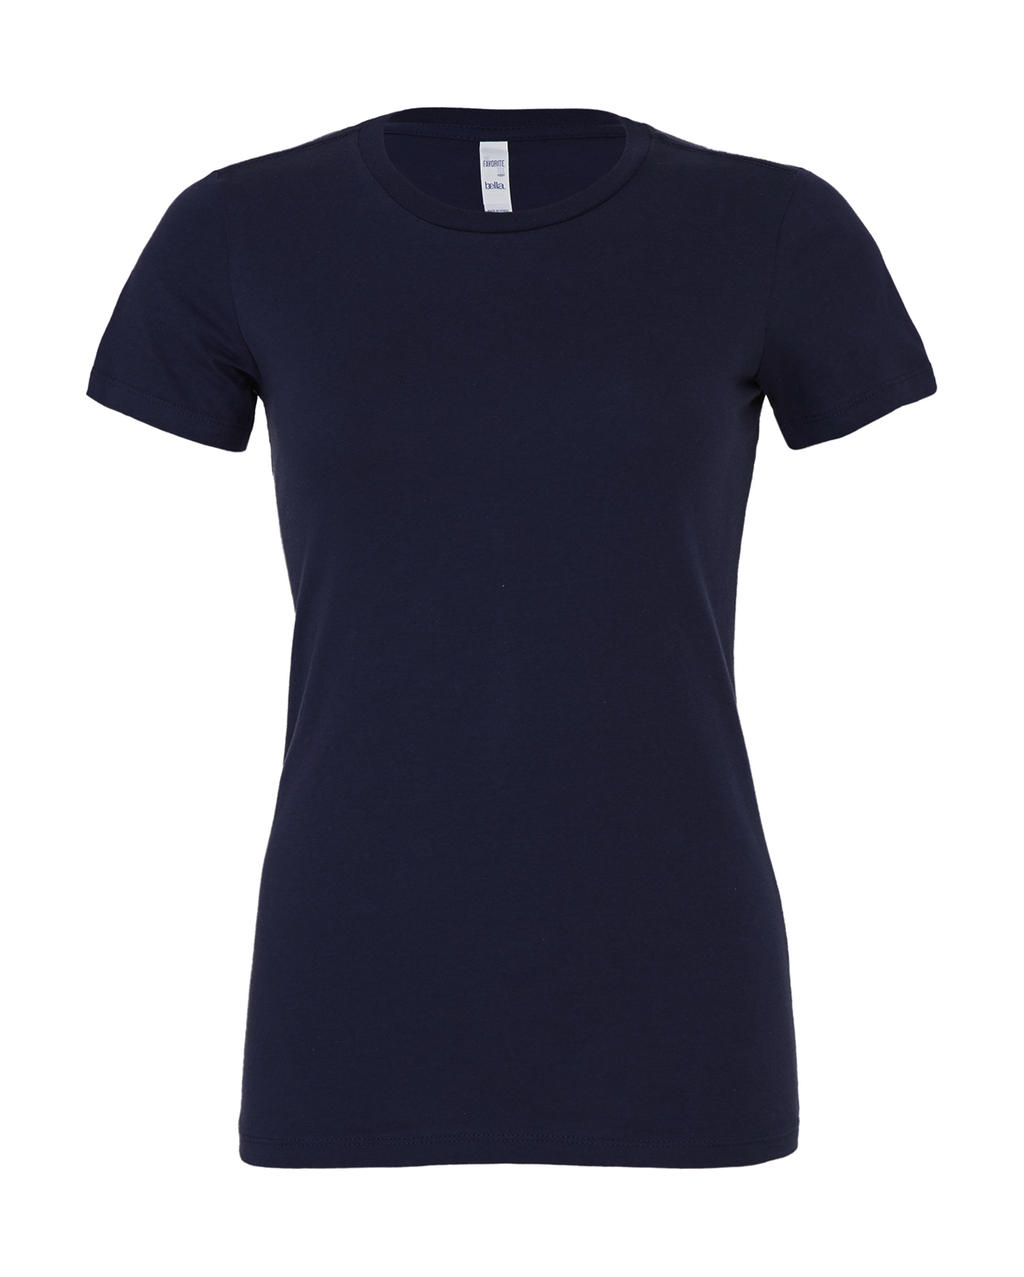  The Favorite T-Shirt in Farbe Navy